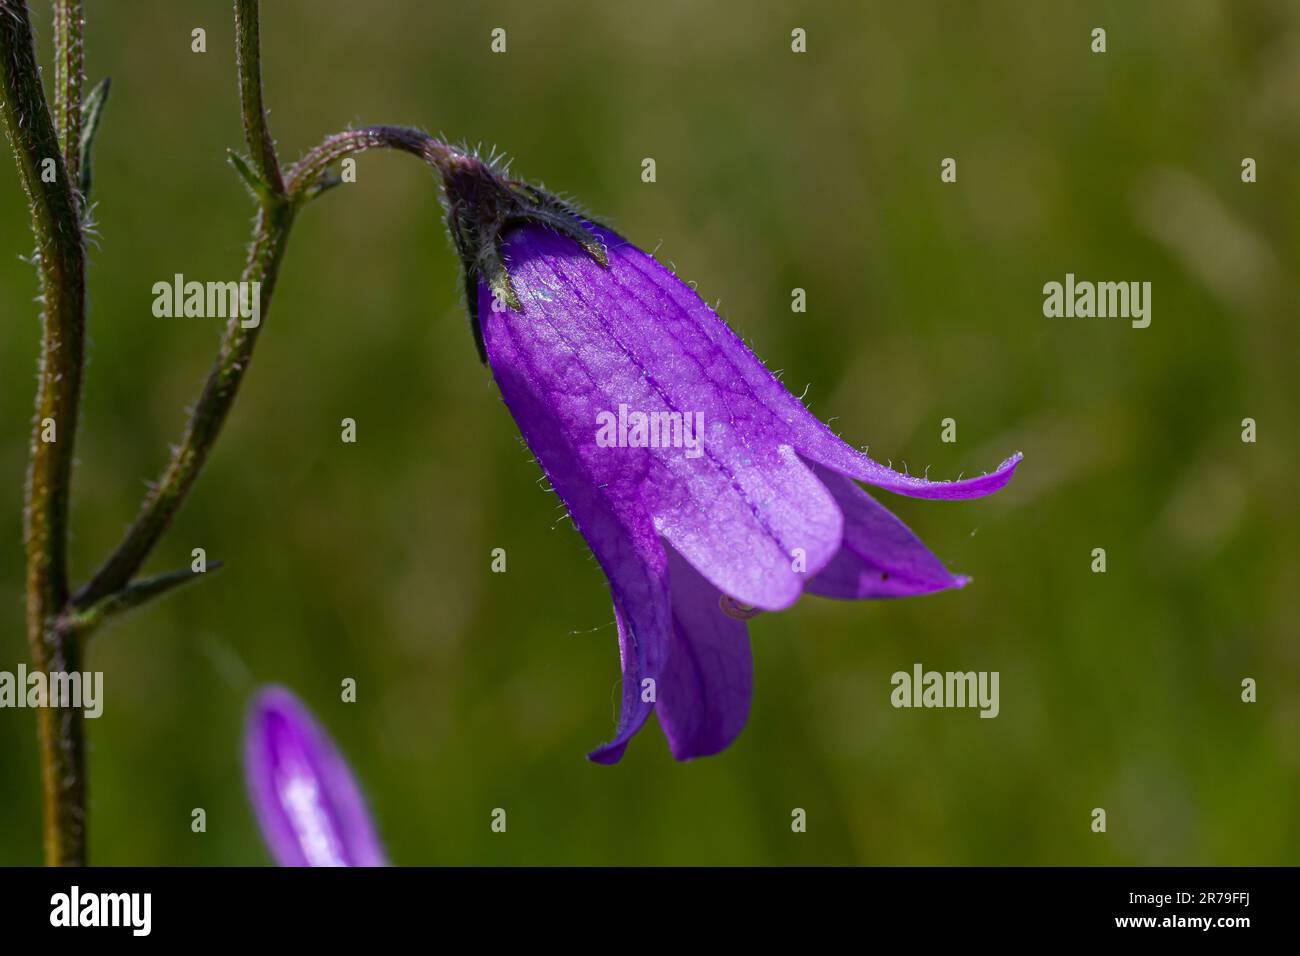 Closeup campanula sibirica with blurred background in summer garden Stock Photo